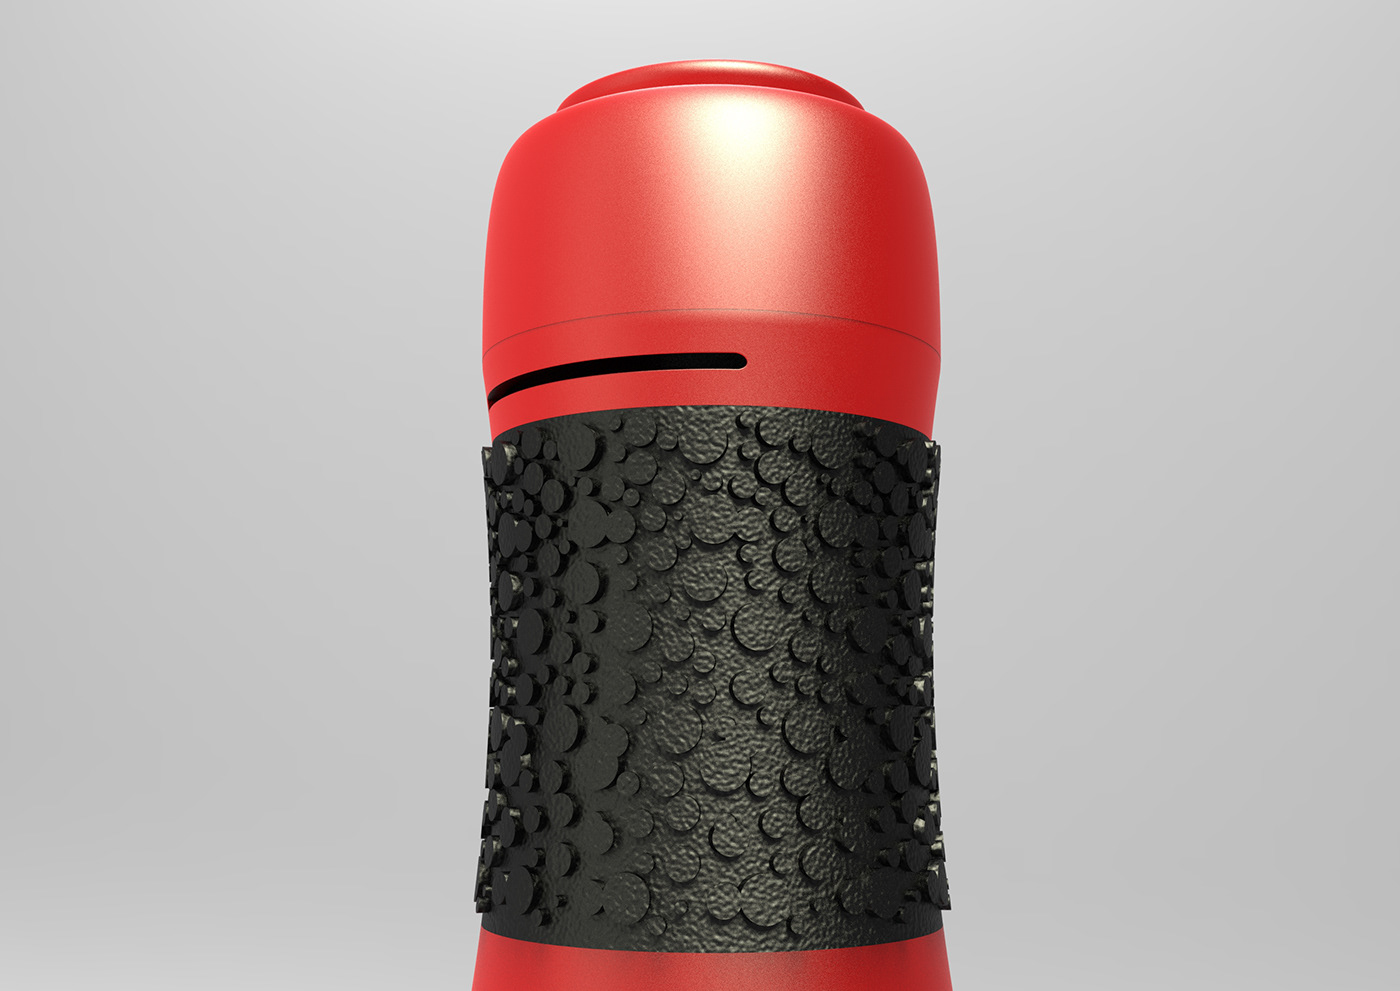 3D cad concept humidifier industrial design  product design 